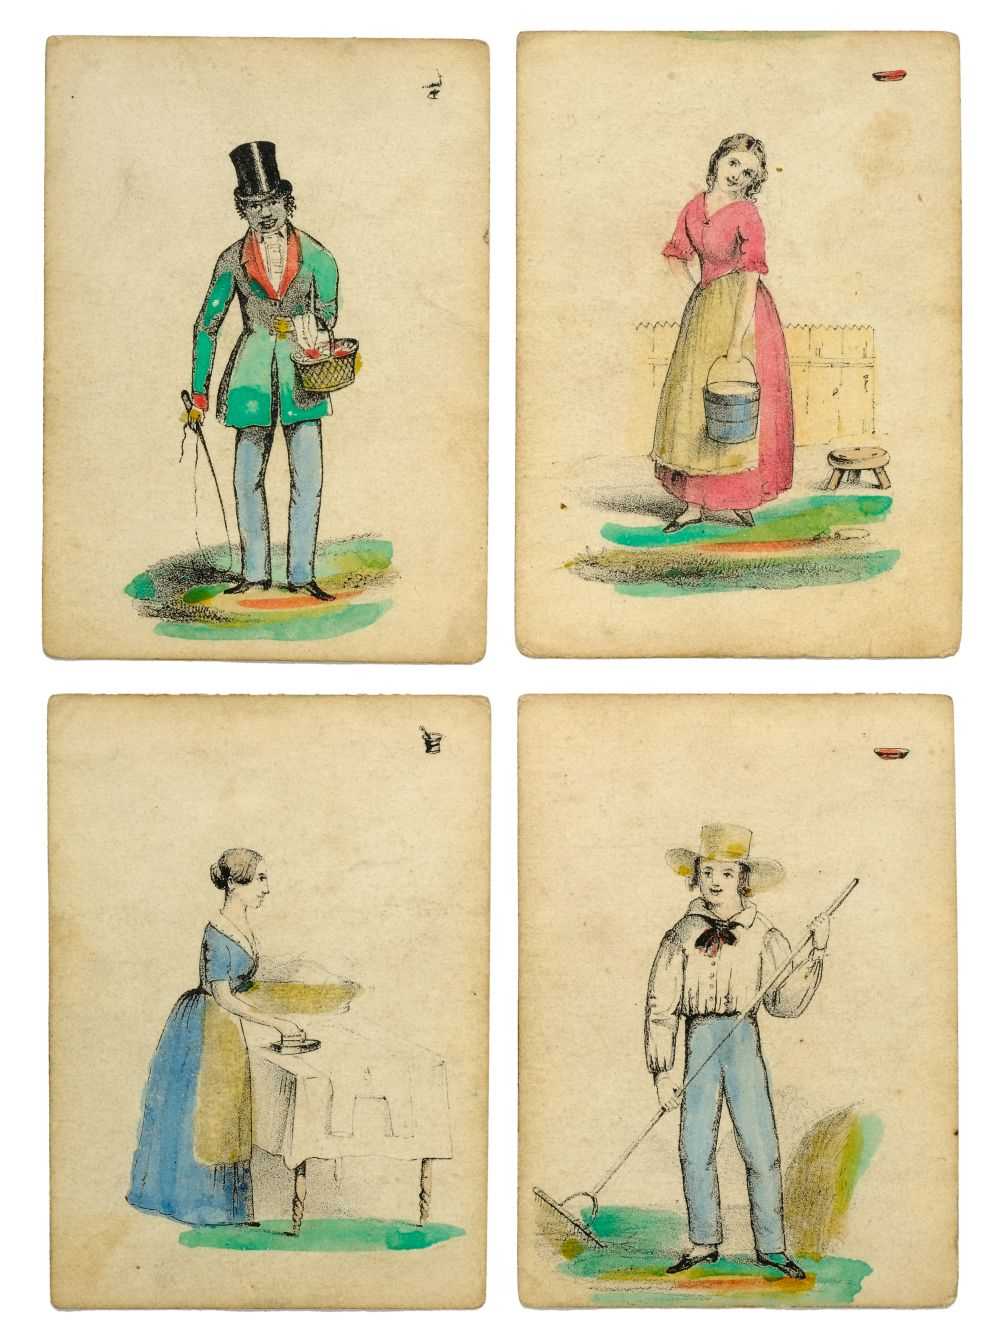 Lot 512 - Card Game. The Improved and Illustrated Game of Doctor Busby